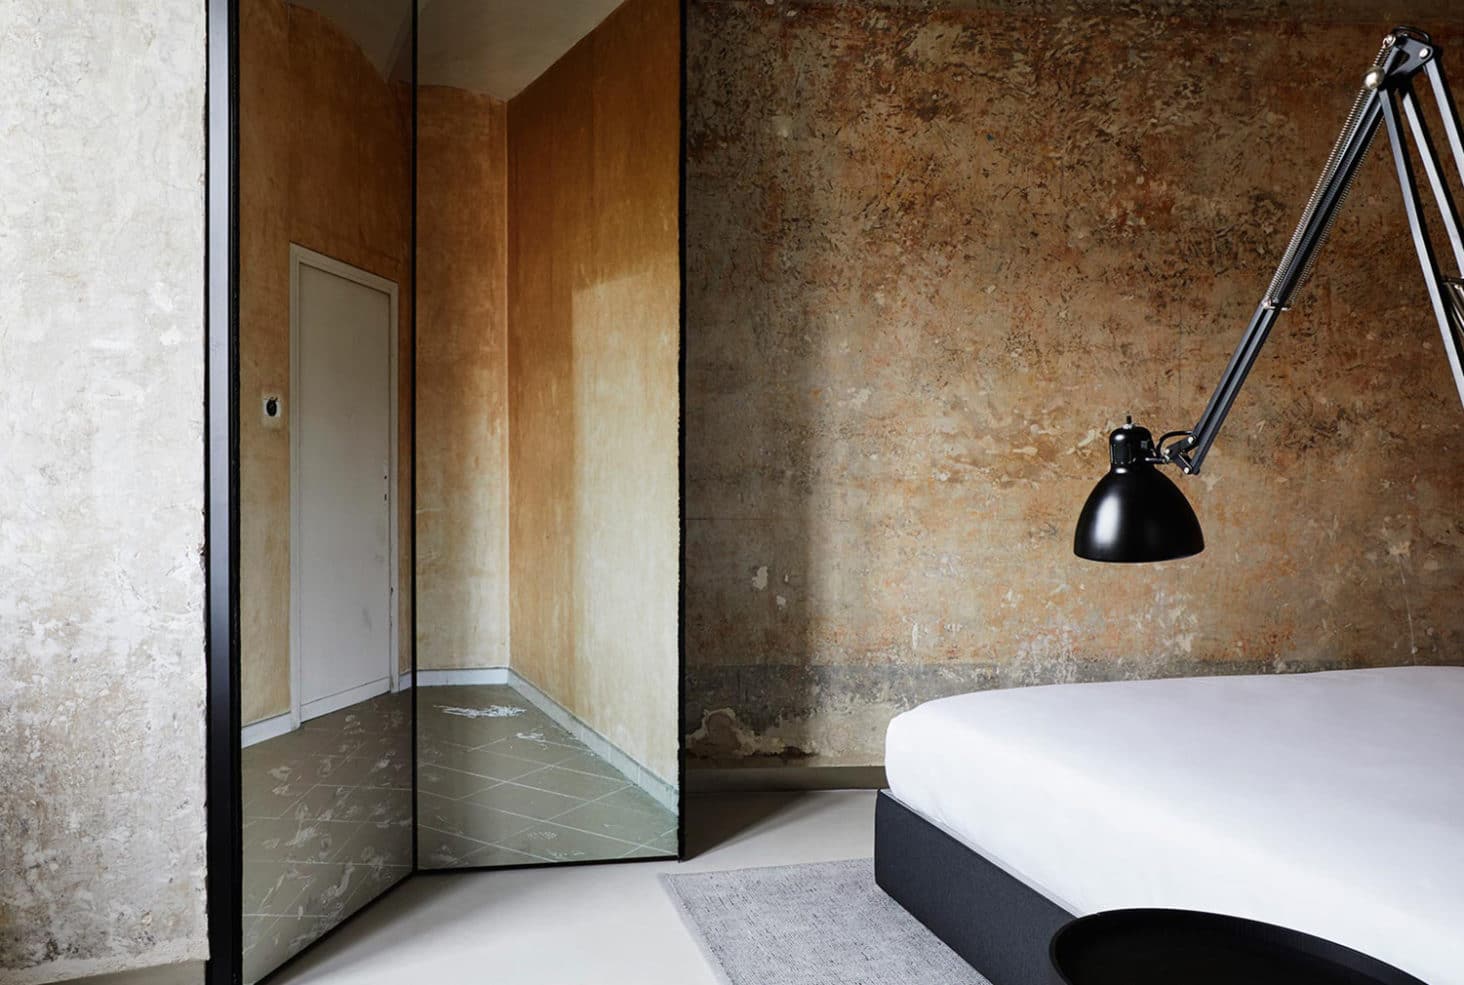 Inside the new Jean Nouvel-designed concept hotel, Rooms of Rome